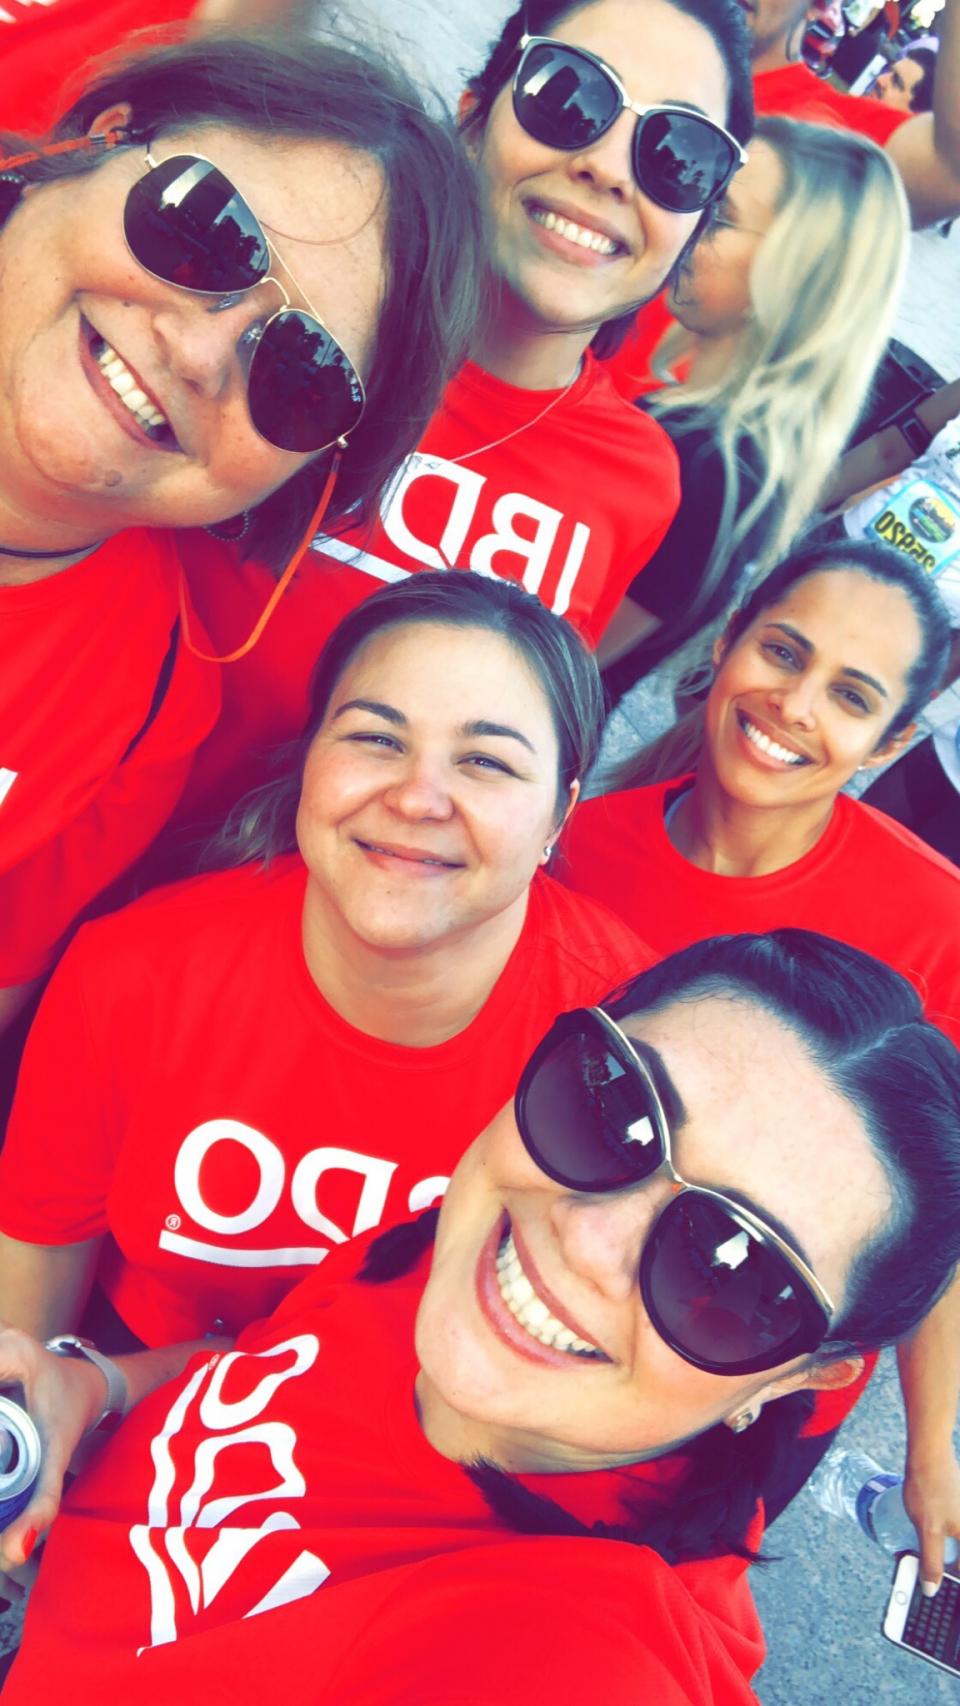 BDO professionals from the Miami office had some fun at the Mercedes-Benz Corporate Run!